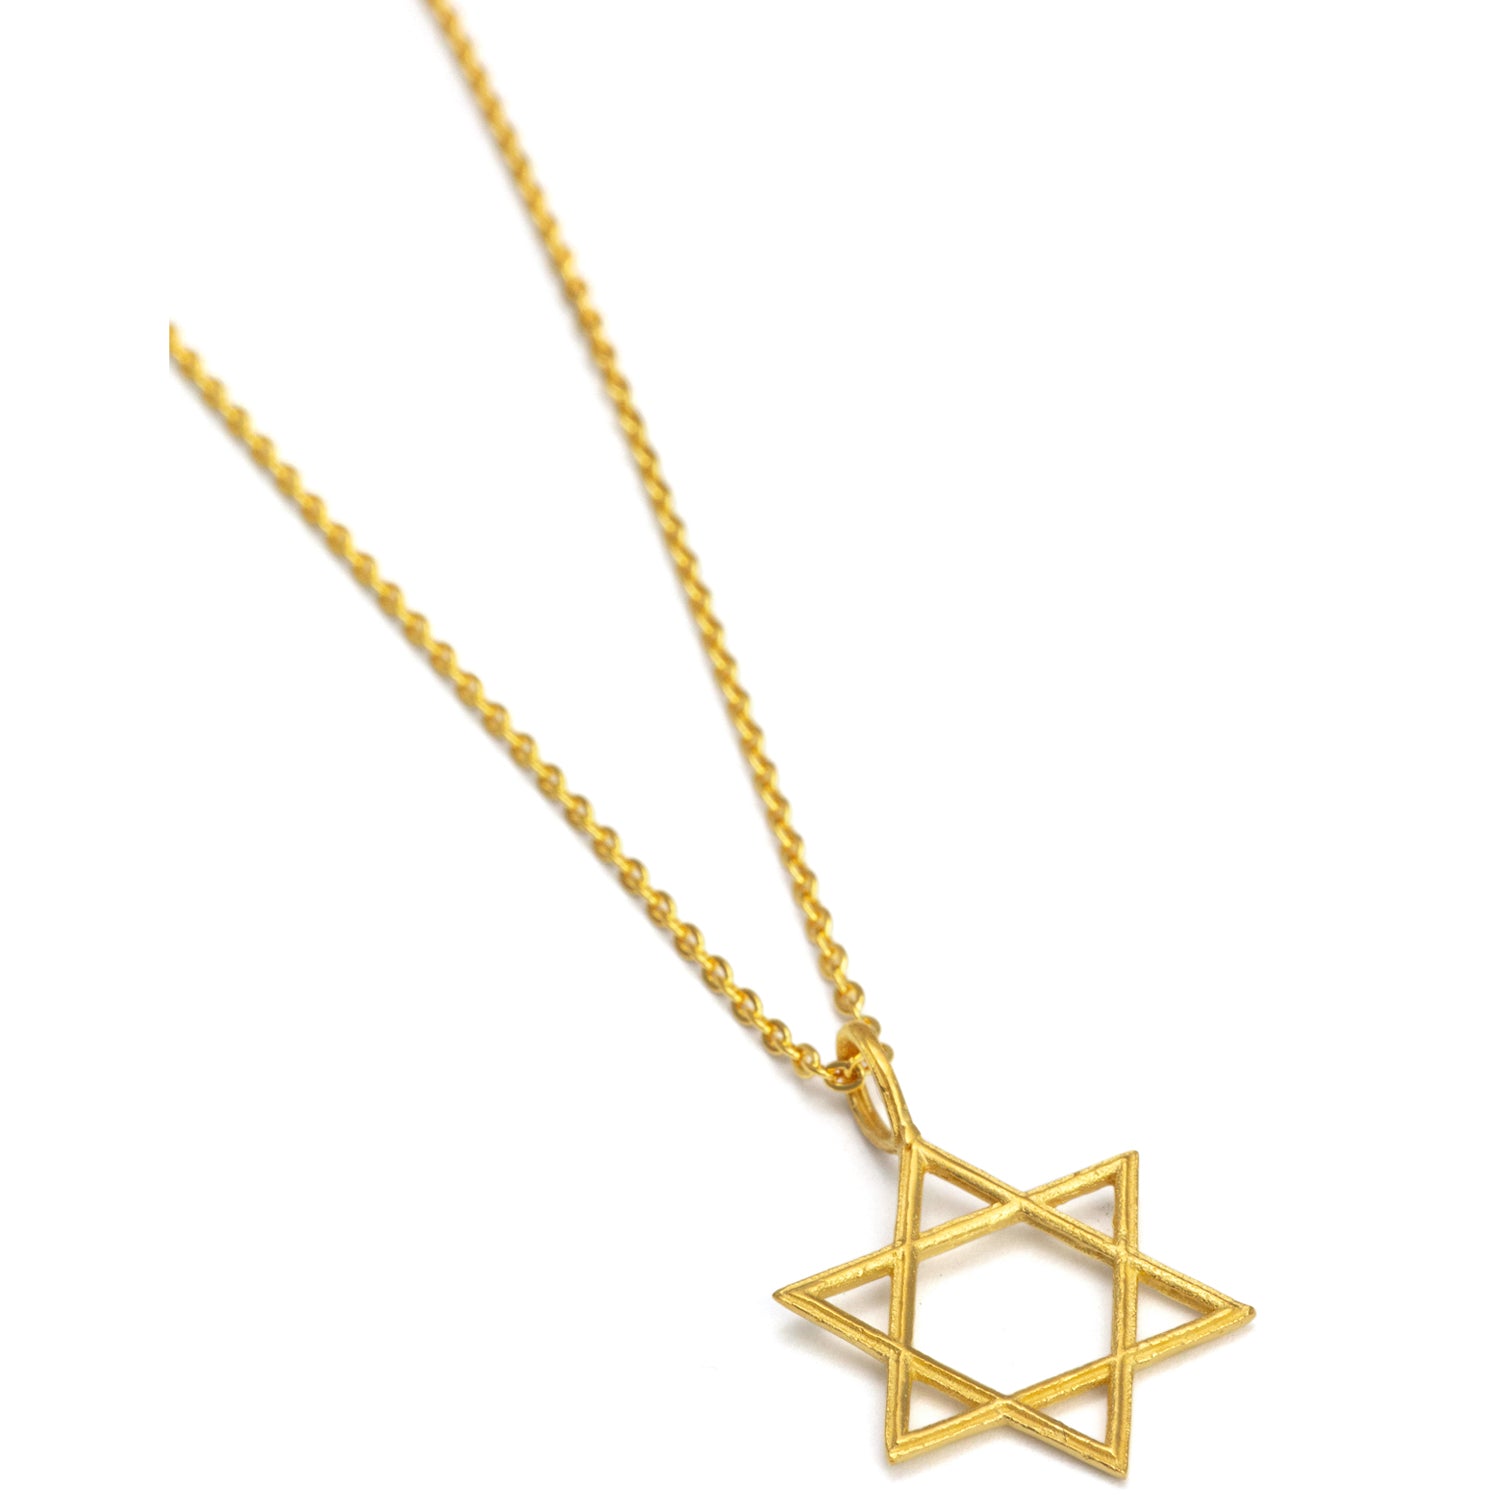 Hexagram pendant made of high-quality gold-plated sterling silver from ETERNAL BLISS